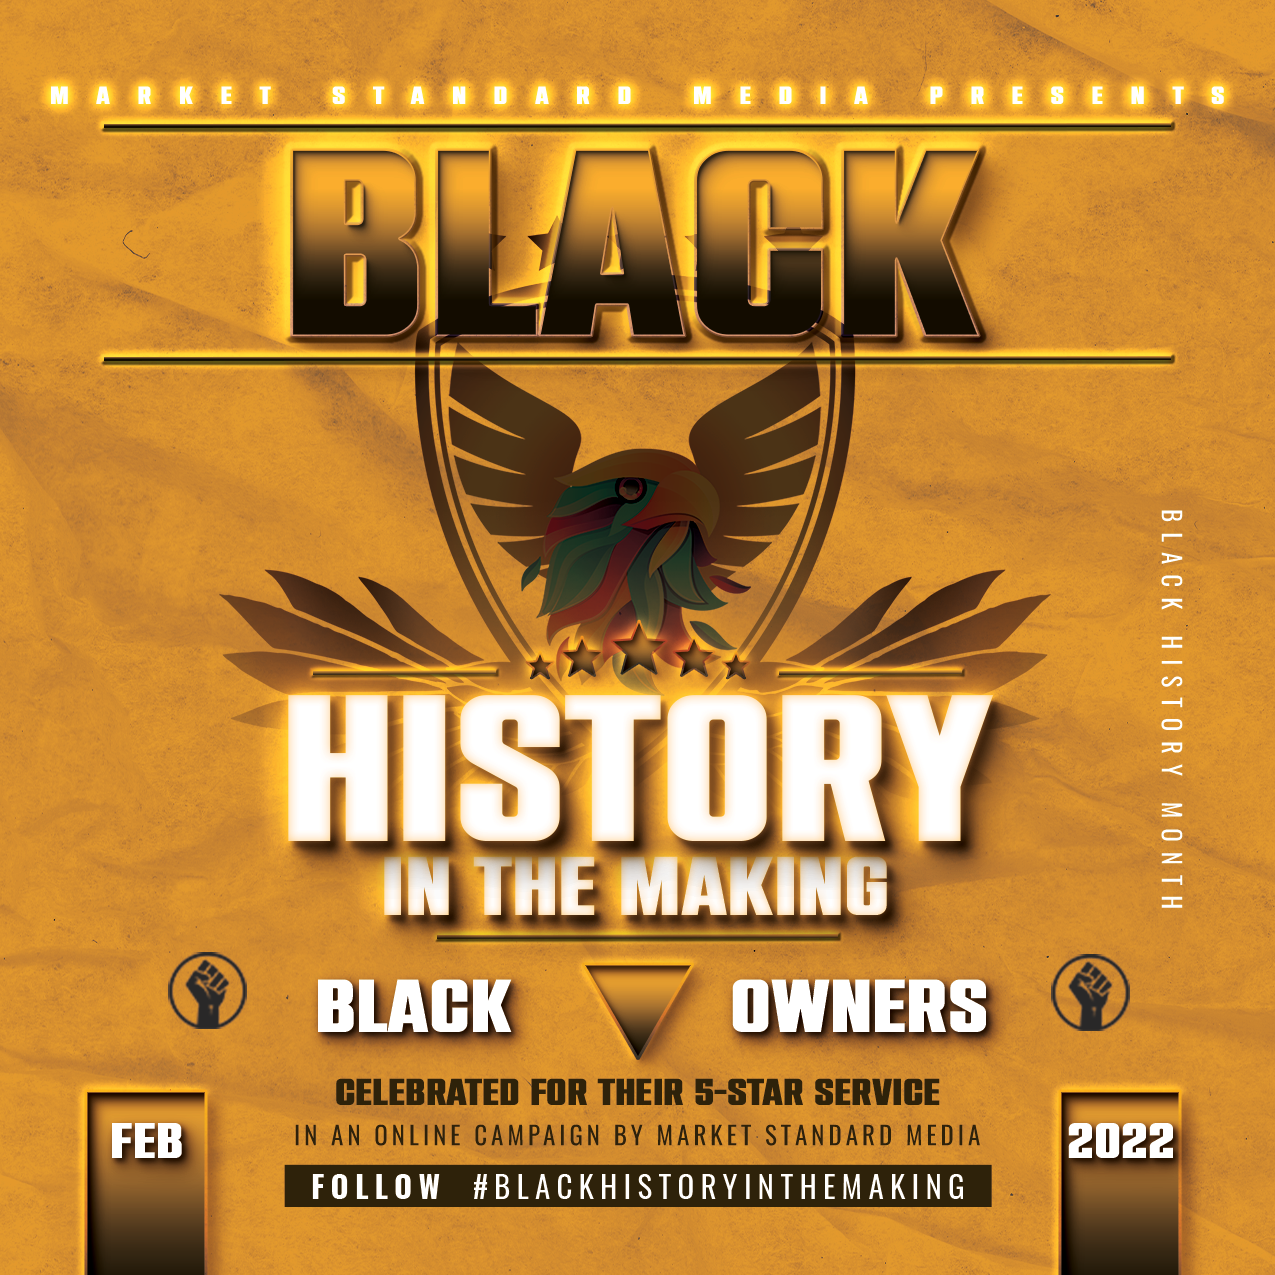 PRESS RELEASE: Black History Month 2022 Market Standard Media Honors Successful Owners